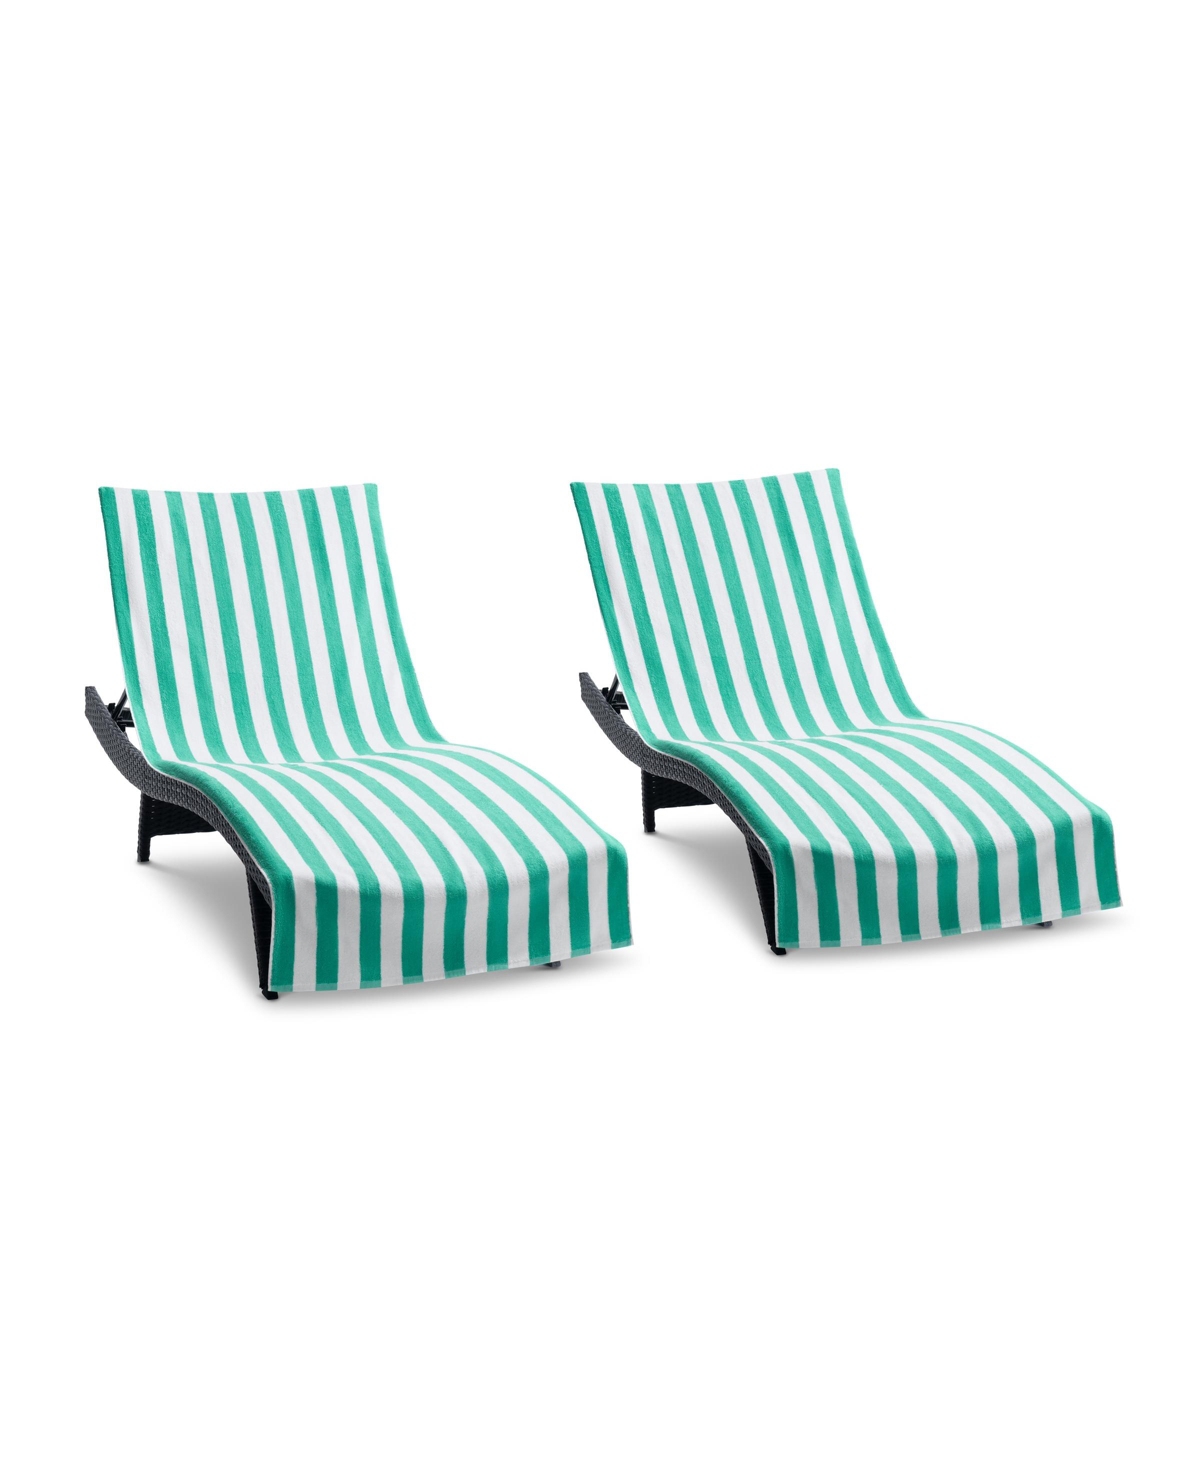 California Cabana Chaise Lounge Covers (2 Pack), Striped Color Options, 30x85 in. with 8" Fitted Pocket for Beach or Pool Chair - Beige